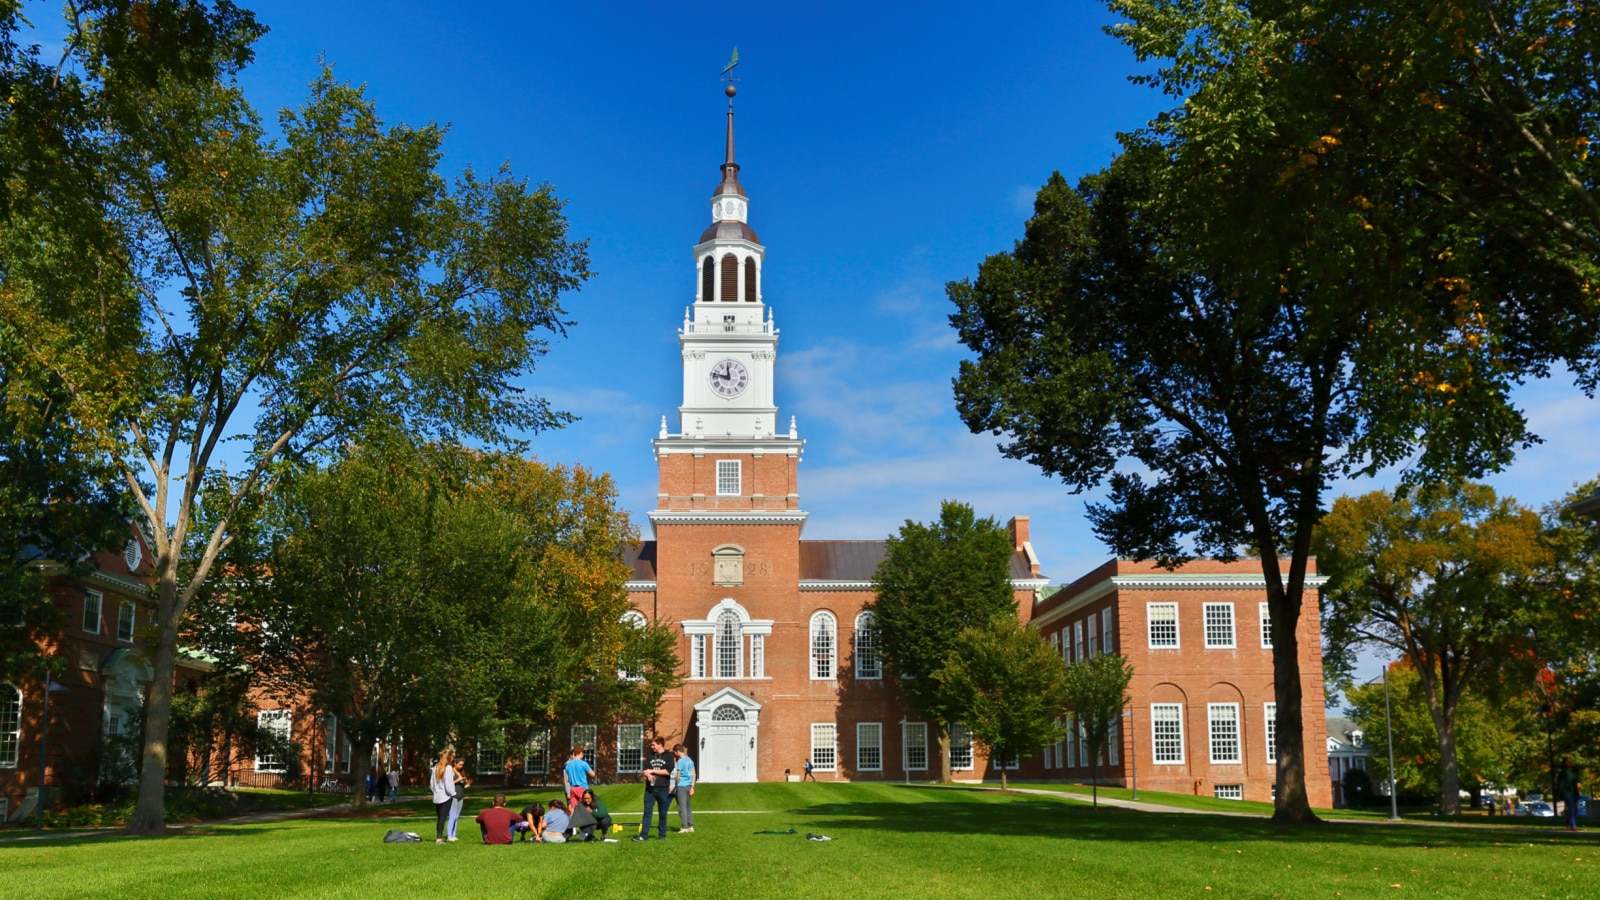 Hanover, New Hampshire USA - October 6, 2018: The Baker-Berry Library on the campus of Dartmouth College. Dartmouth College is a private Ivy League research university in Hanover, New Hampshire